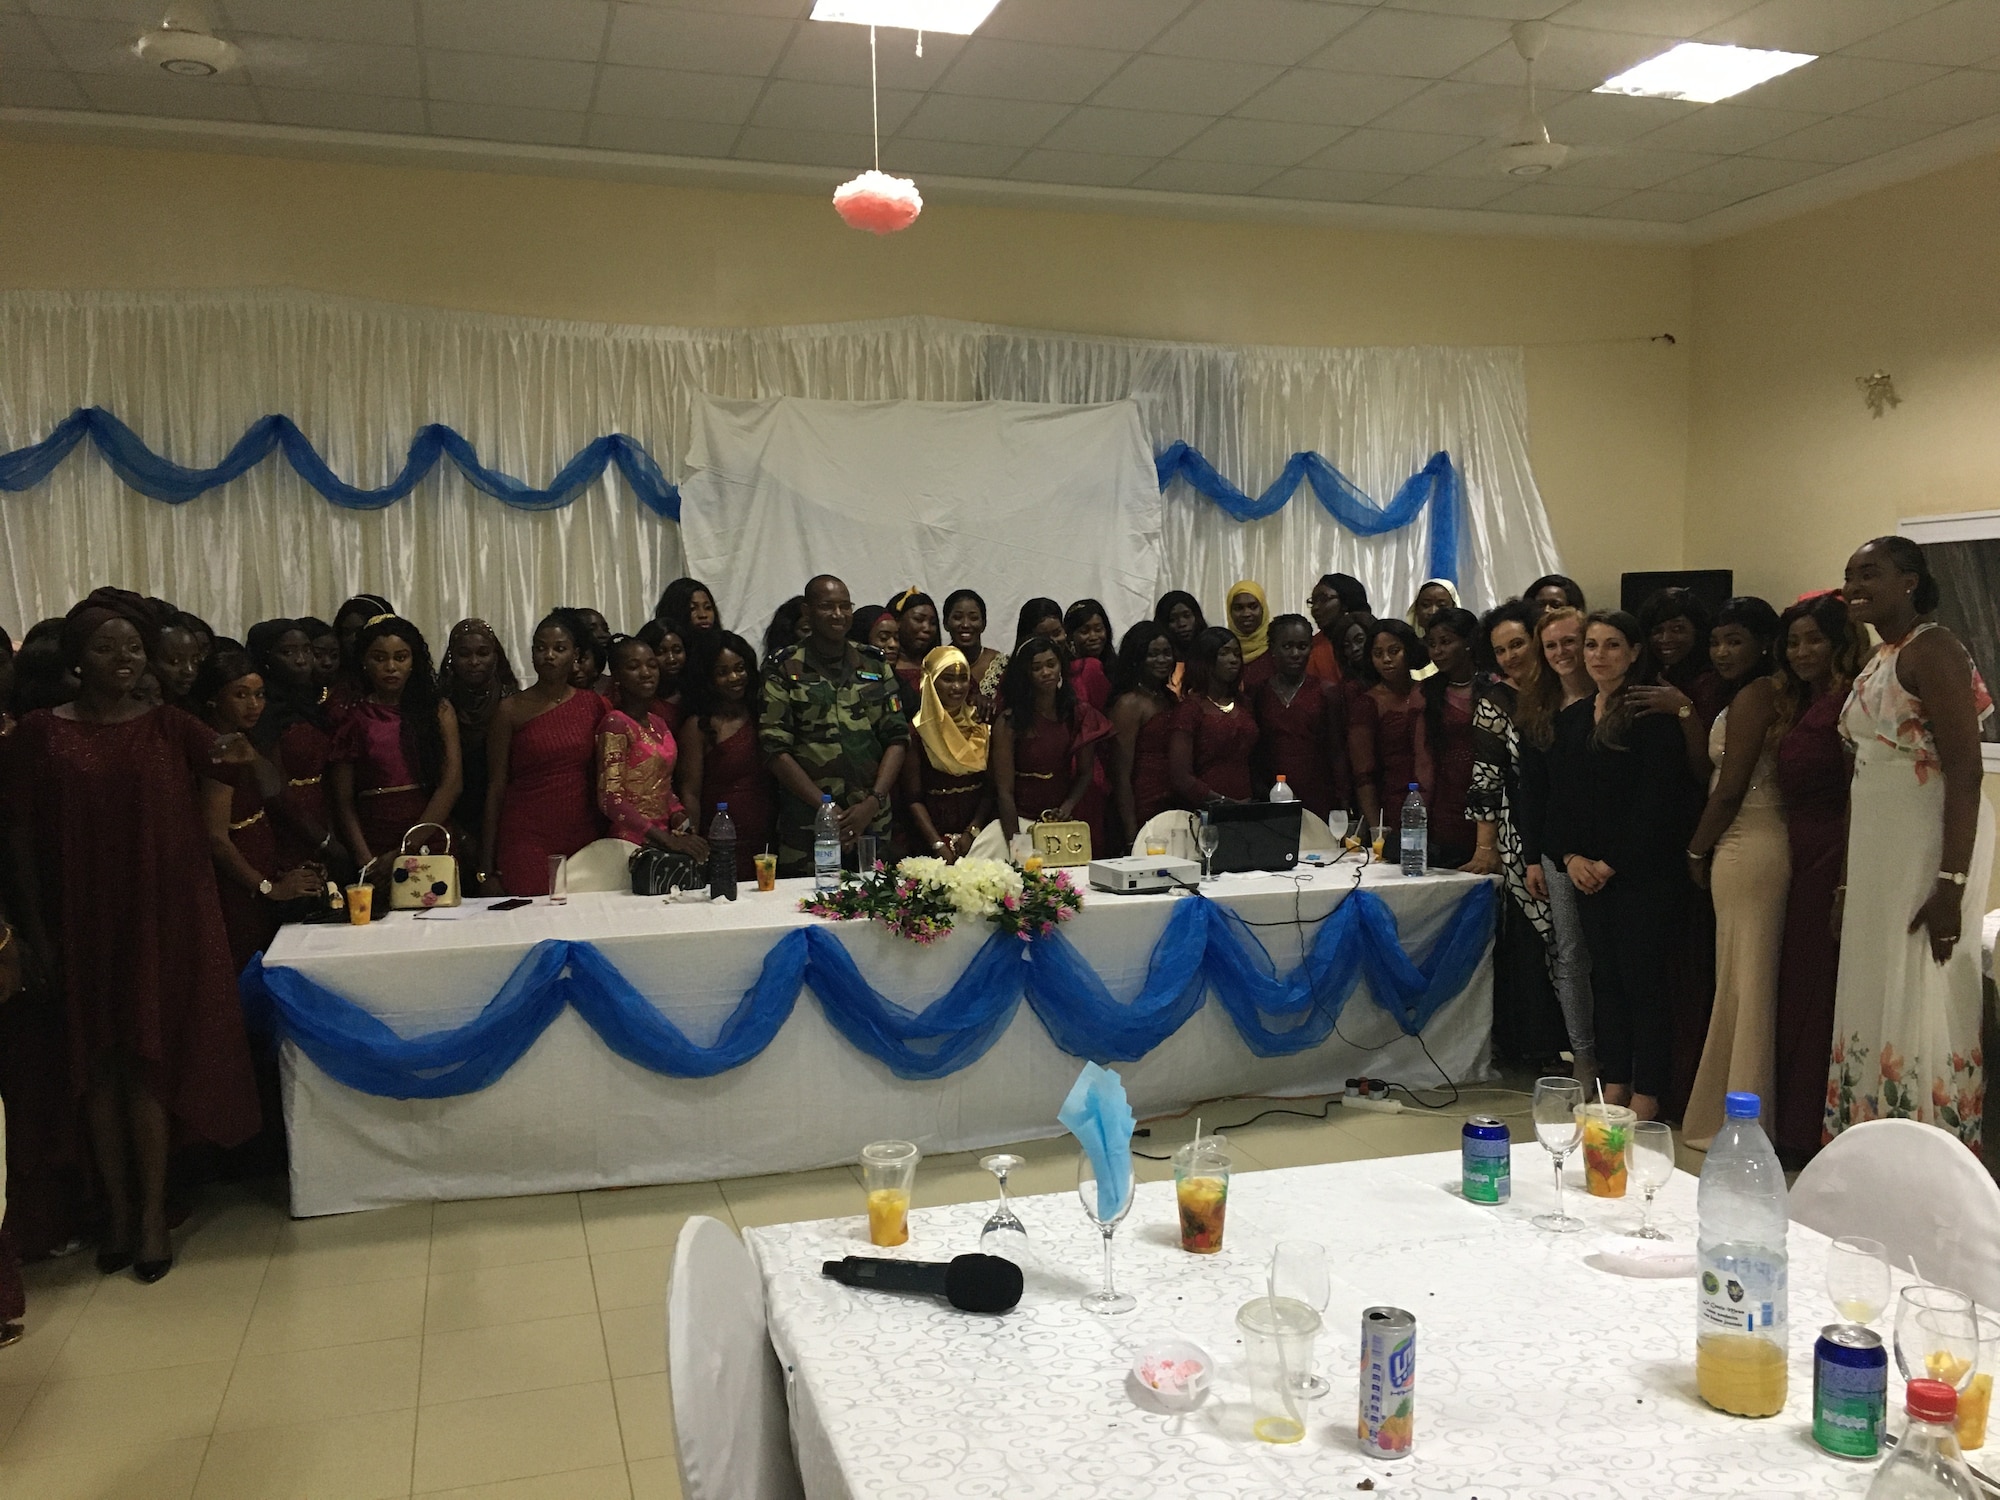 Members of the 818th Mobility Support Advisory Squadron and Senegalese Air Force pose for a photo at the Women's Military Integration Dinner Debate in Senegal, Africa, March 7, 2020.  The event was held in honor of International Women's Day and included discussions on opportunities and challenges associated with advancing the participation of and opportunities for women in the Senegalese Air Force.